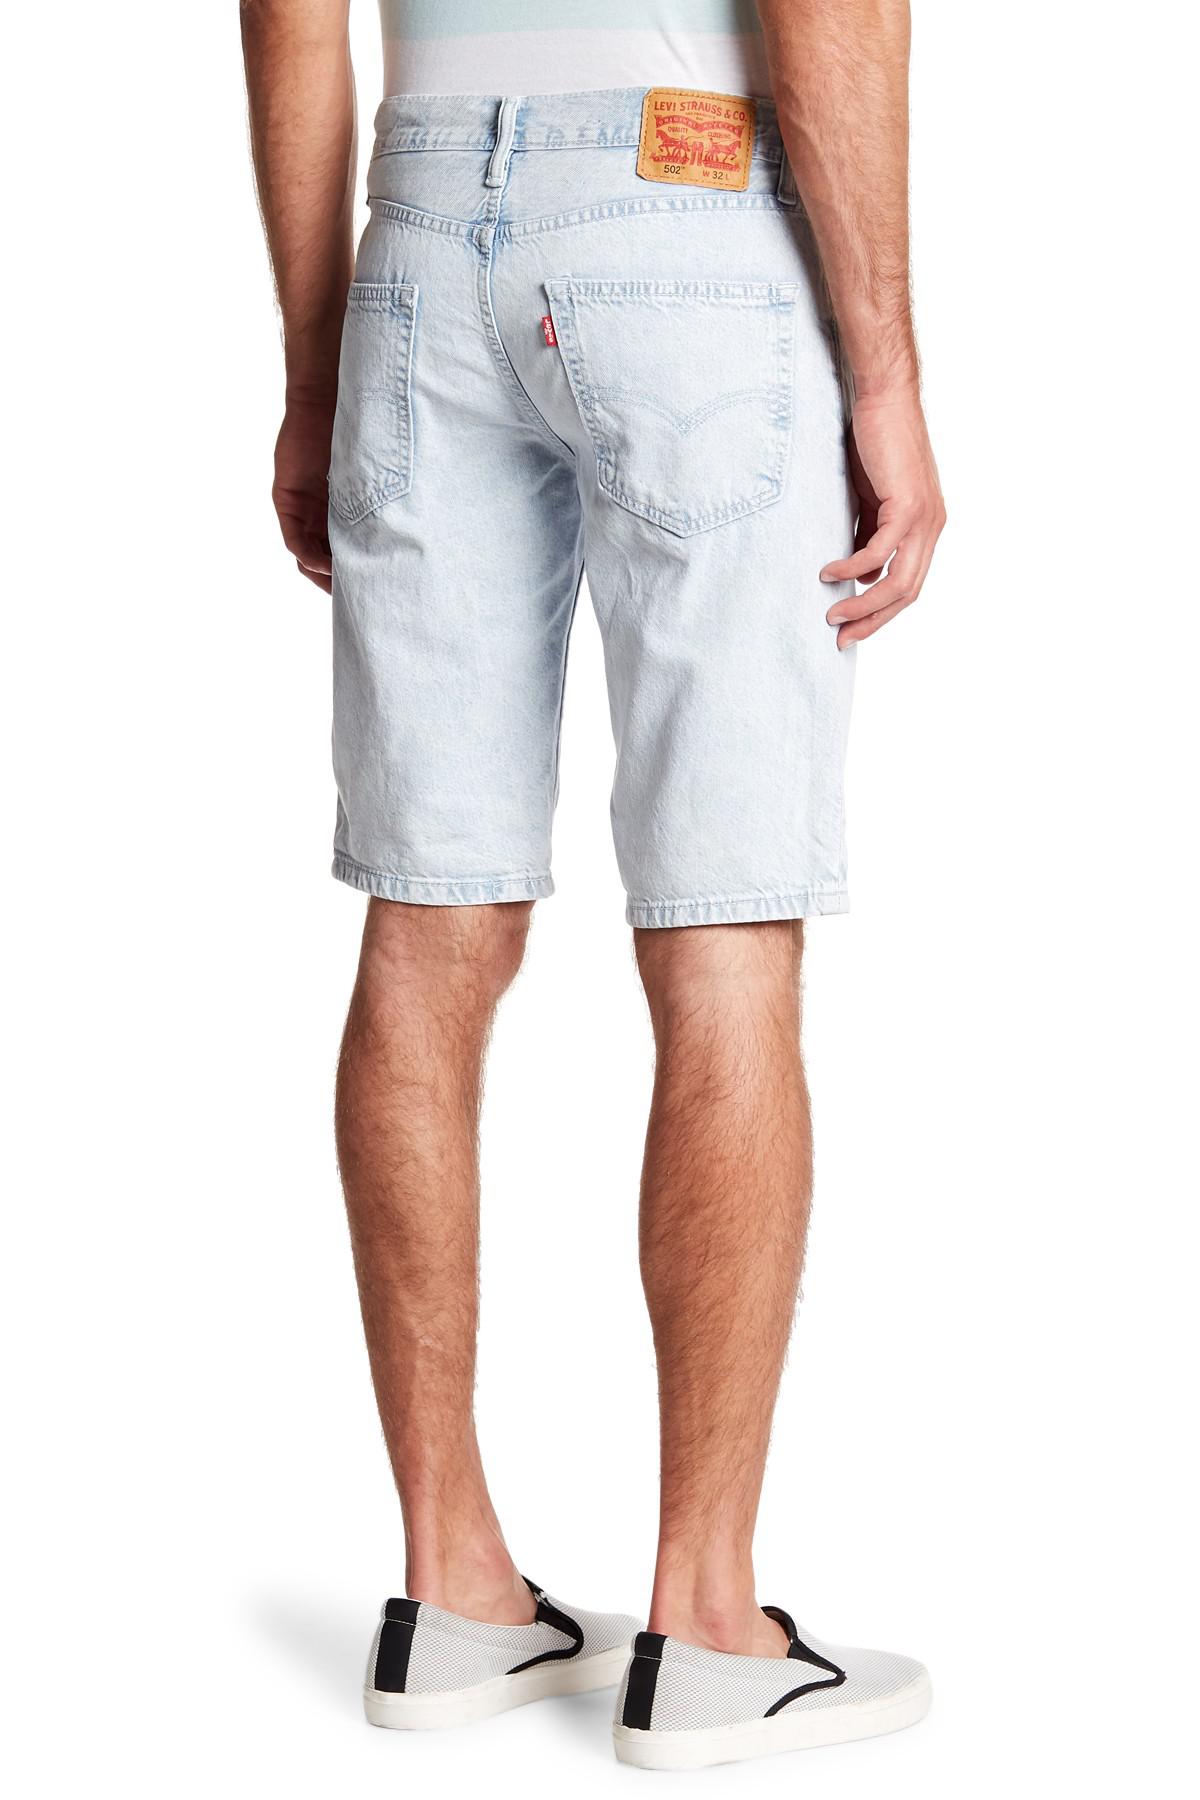 Levi's Cotton 502 Long Regular Tapered Shorts in Blue for Men - Lyst